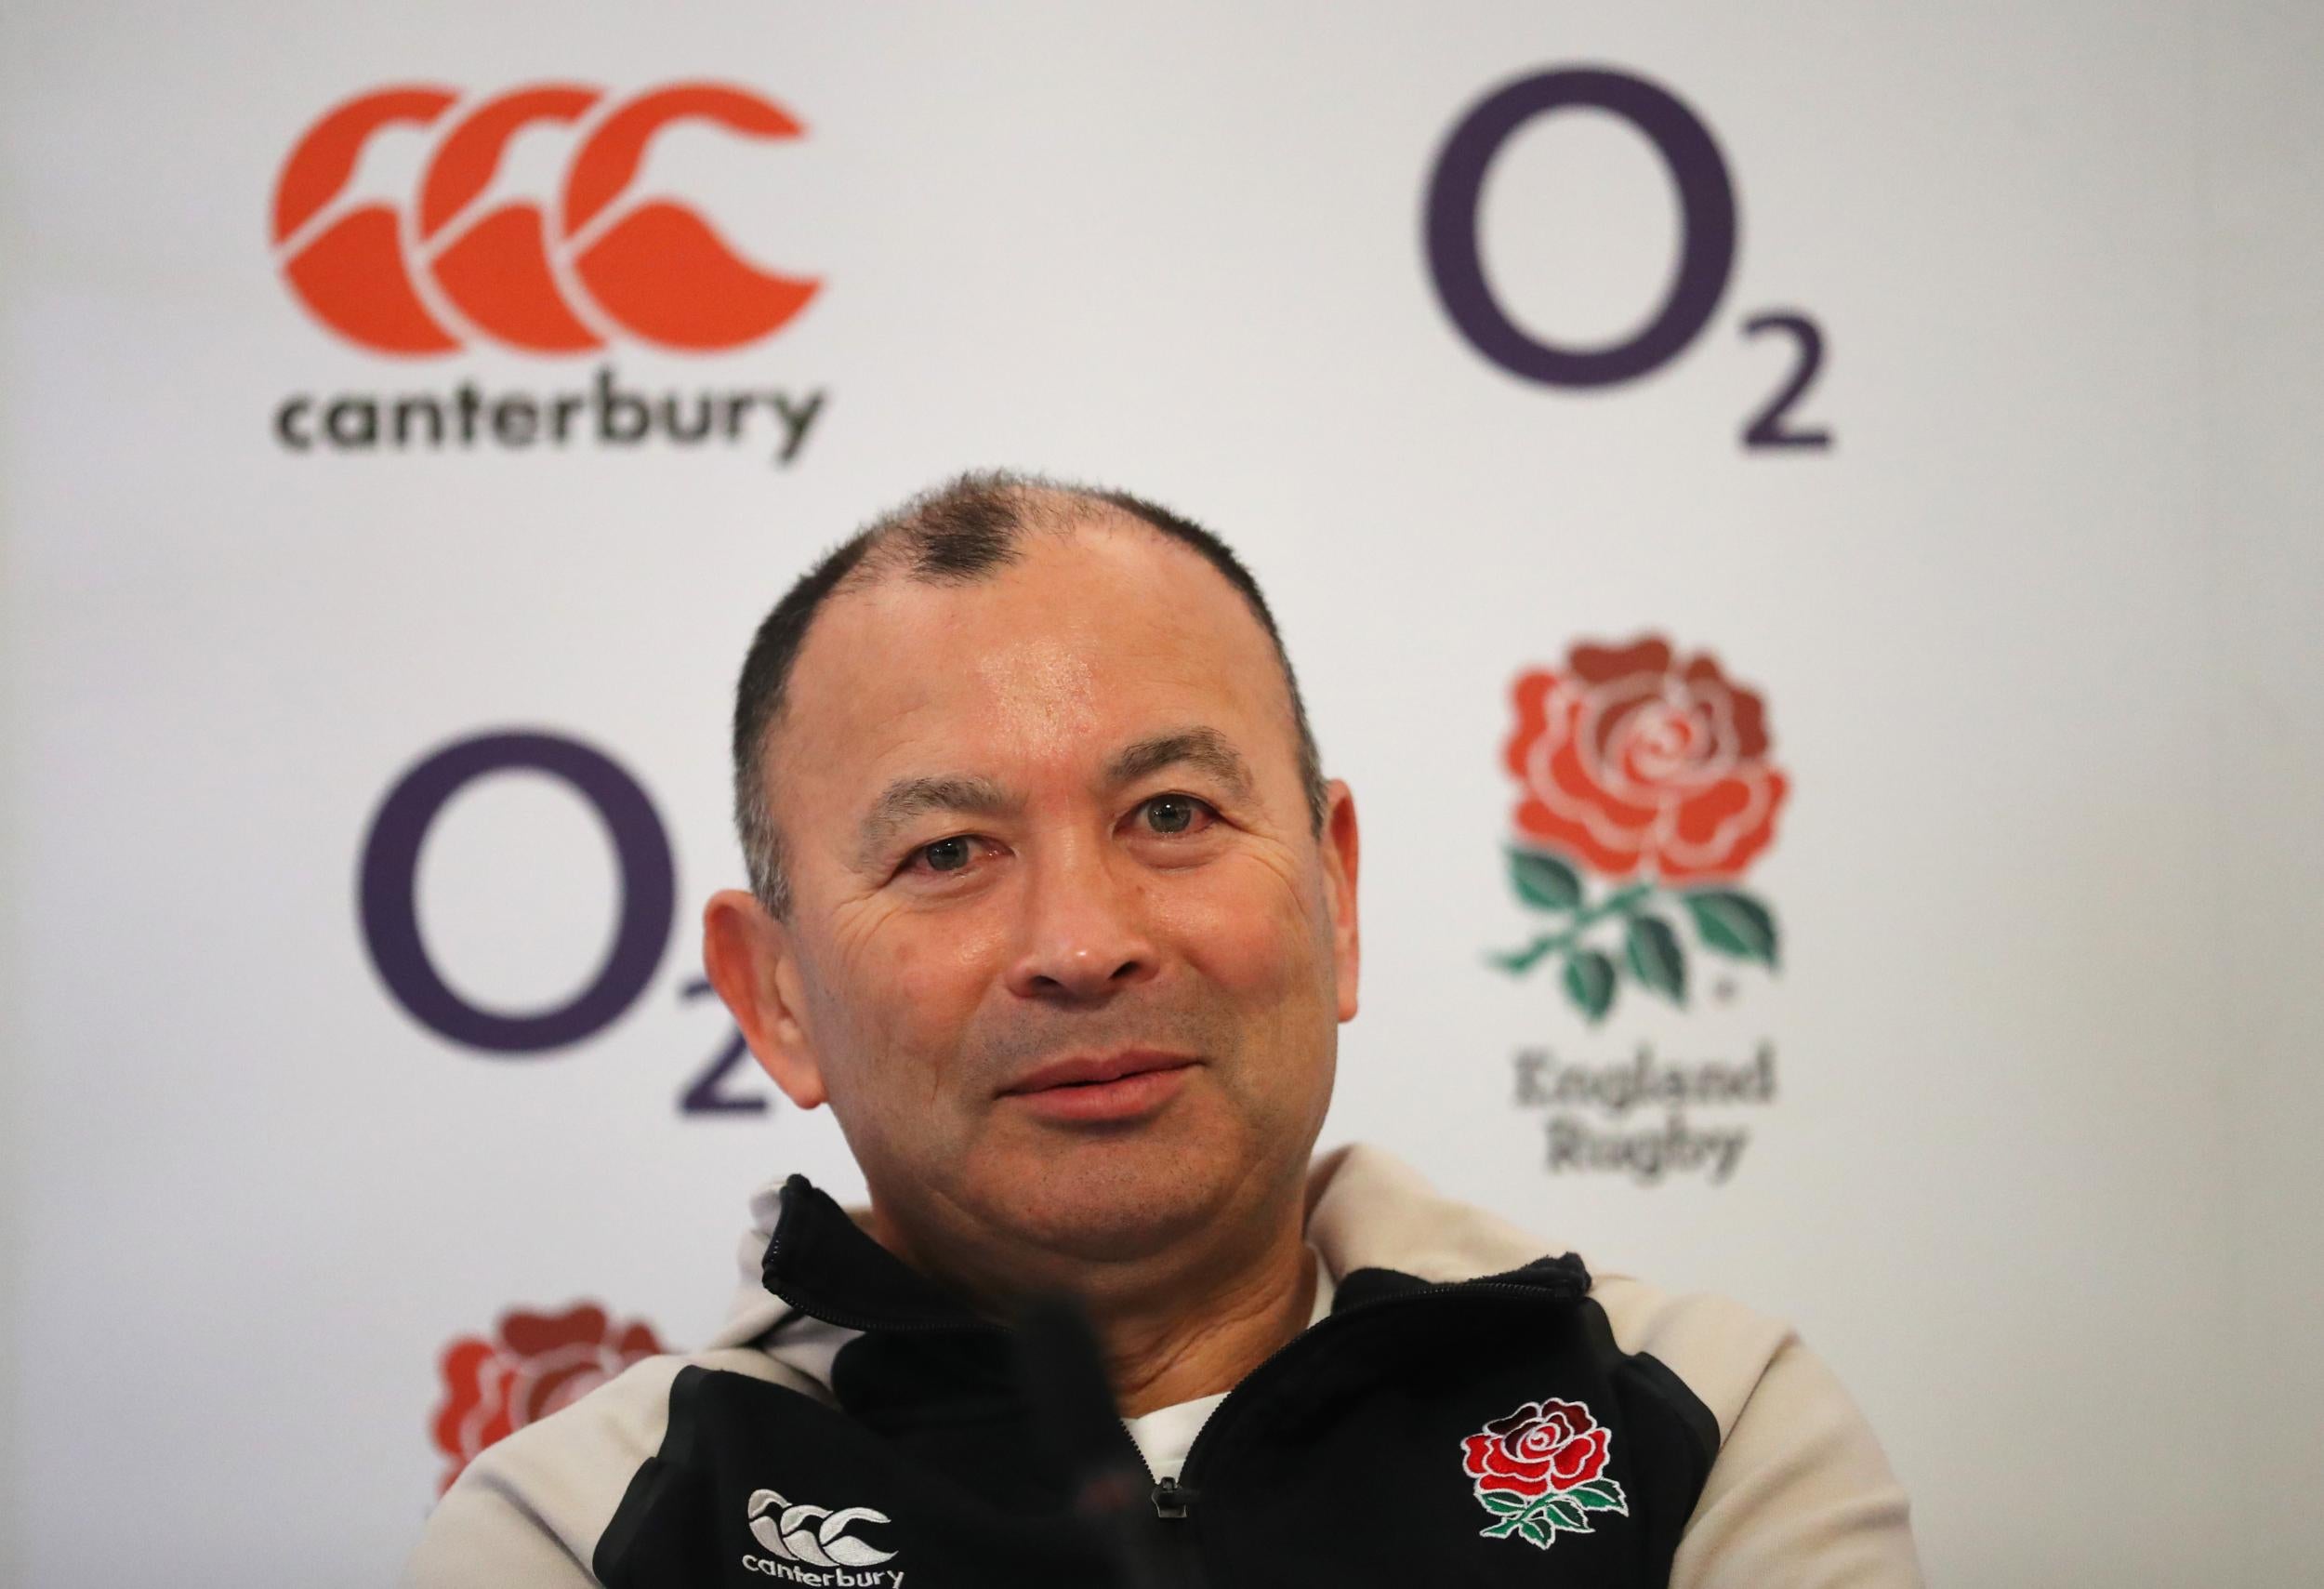 Eddie Jones has made no secret of his desire to see Te'o and Tuilagi together